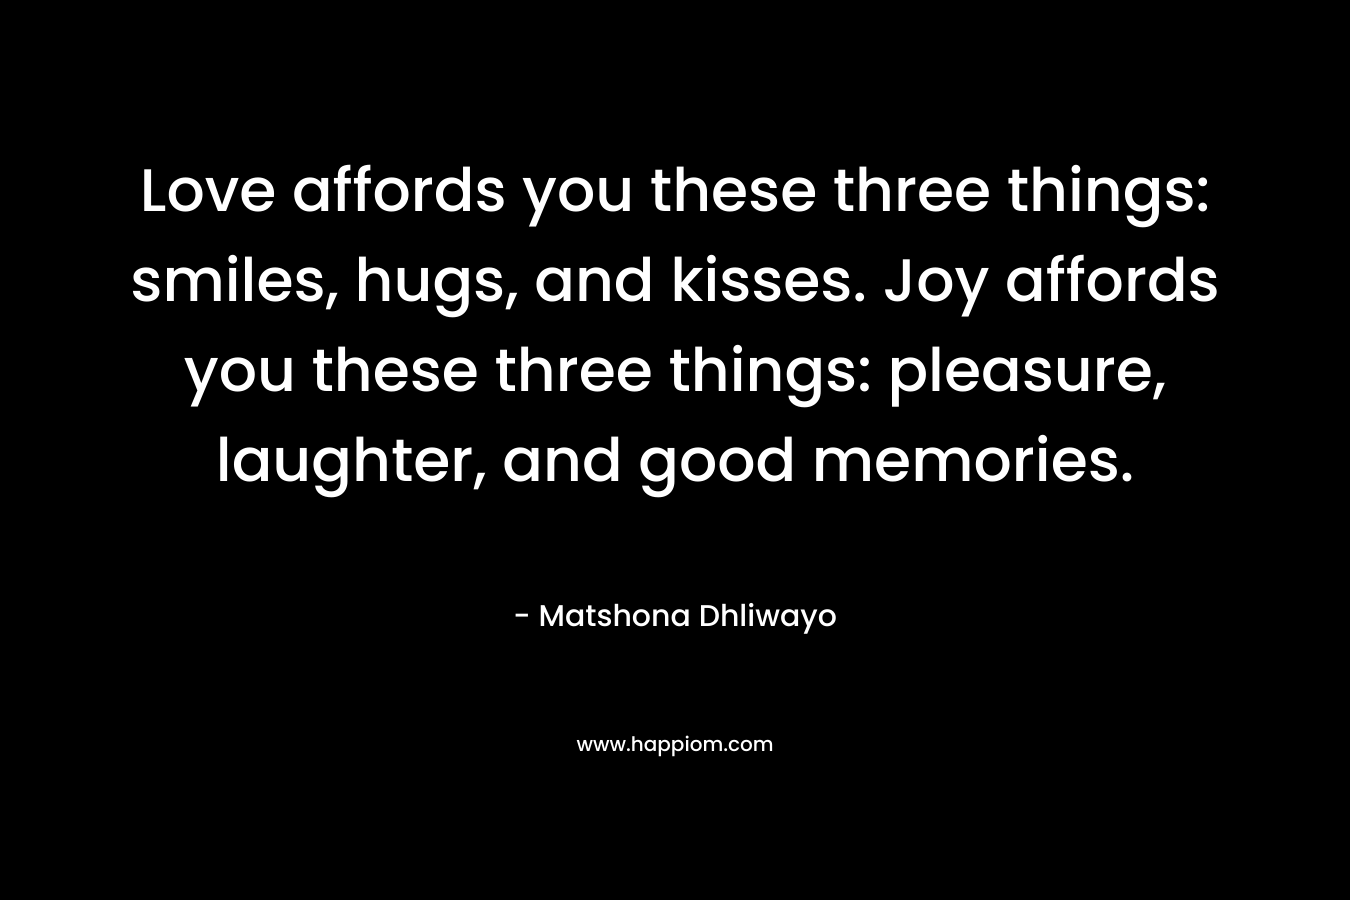 Love affords you these three things: smiles, hugs, and kisses. Joy affords you these three things: pleasure, laughter, and good memories.